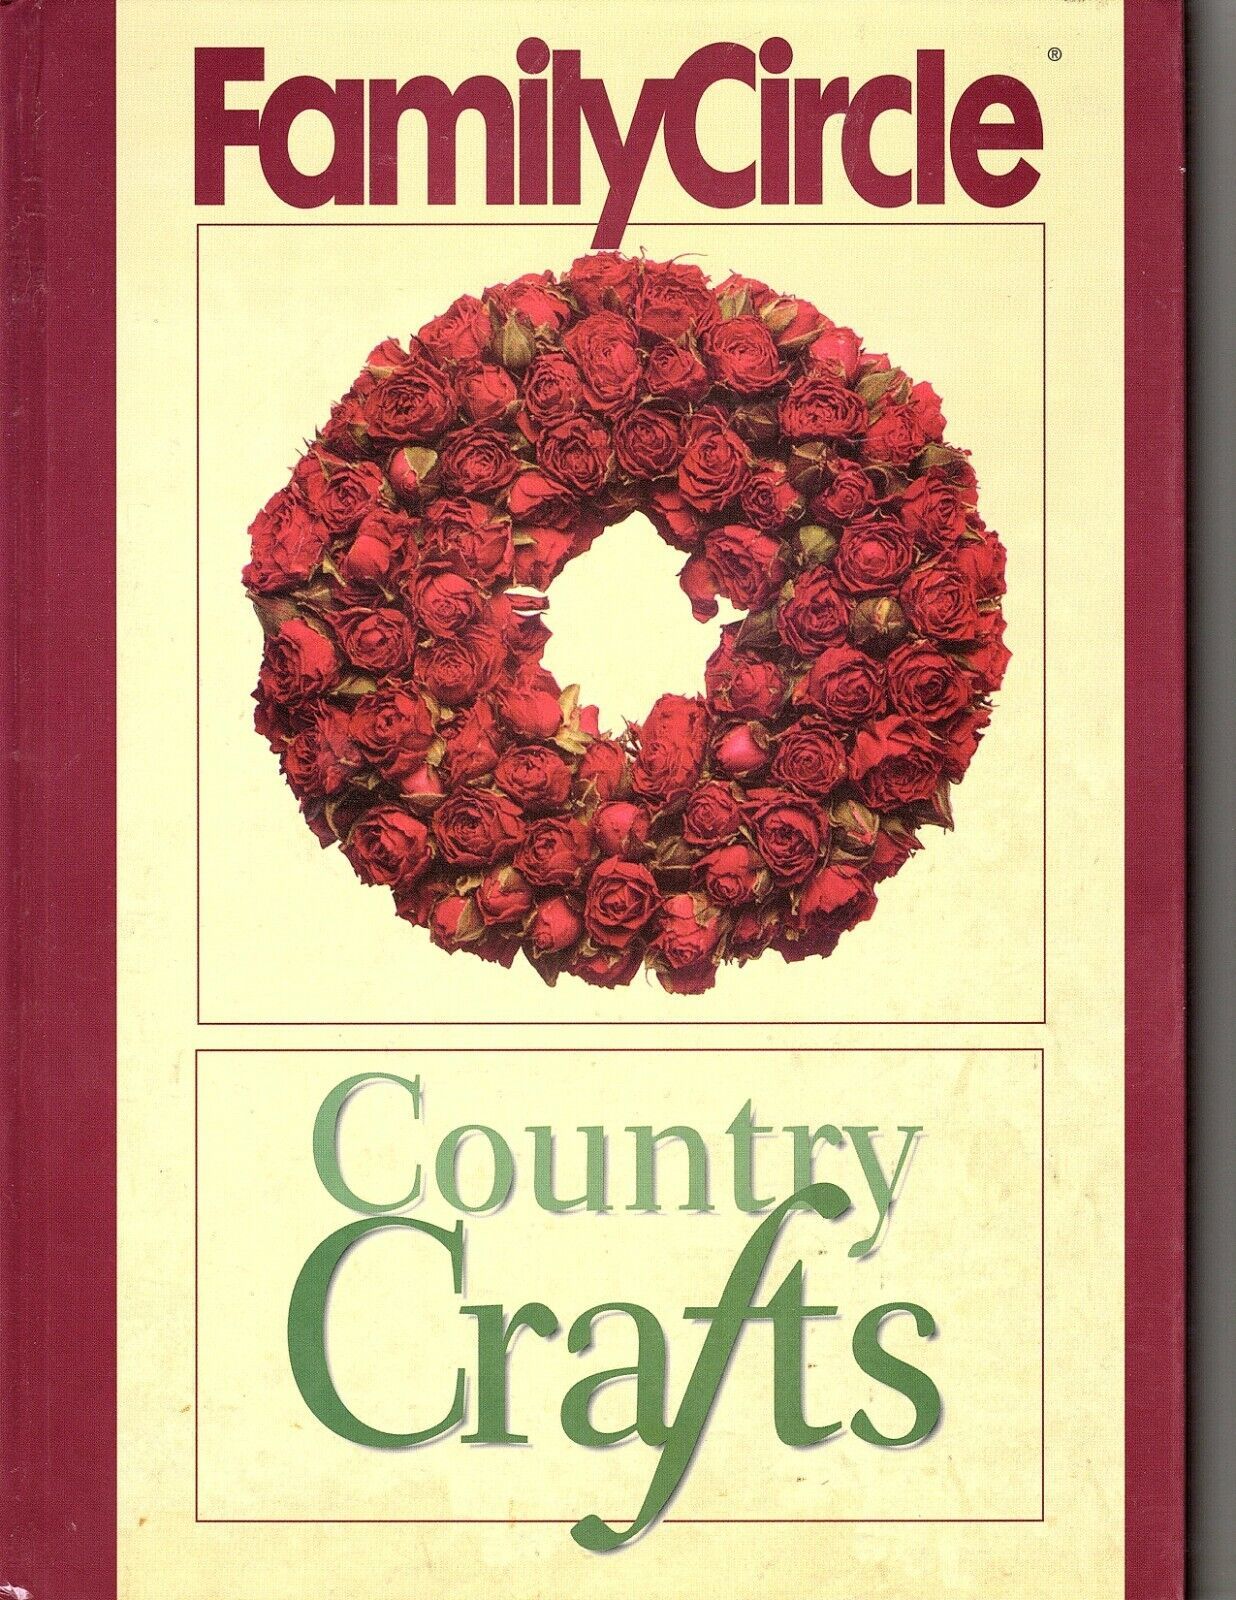 Family Circle Country Crafts Hardcover 1996 Woodworking, Cross Stitch, Knit - $11.17